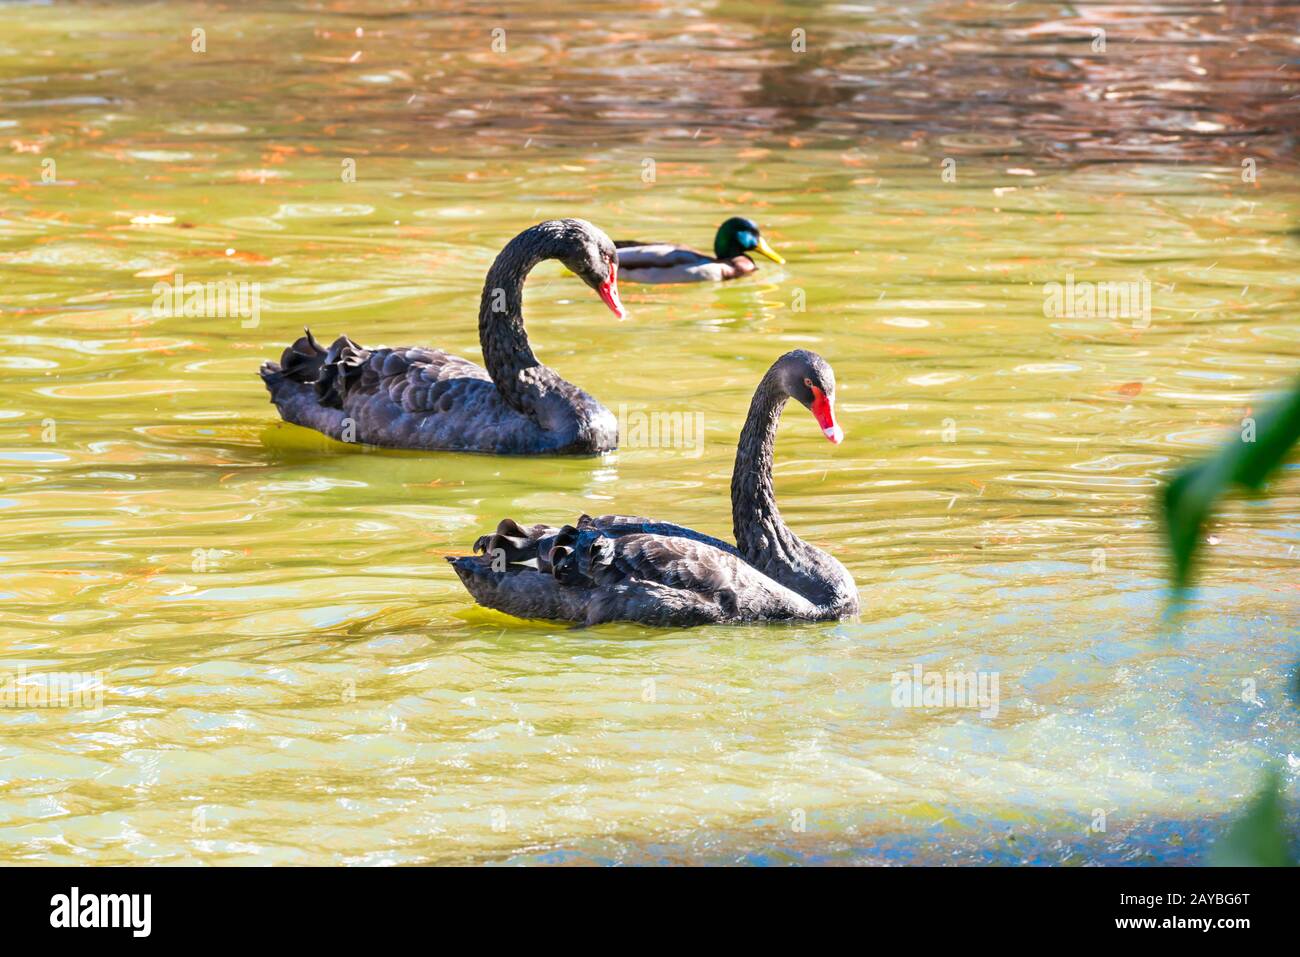 Pair of black swans and ducks swimming in pond Stock Photo